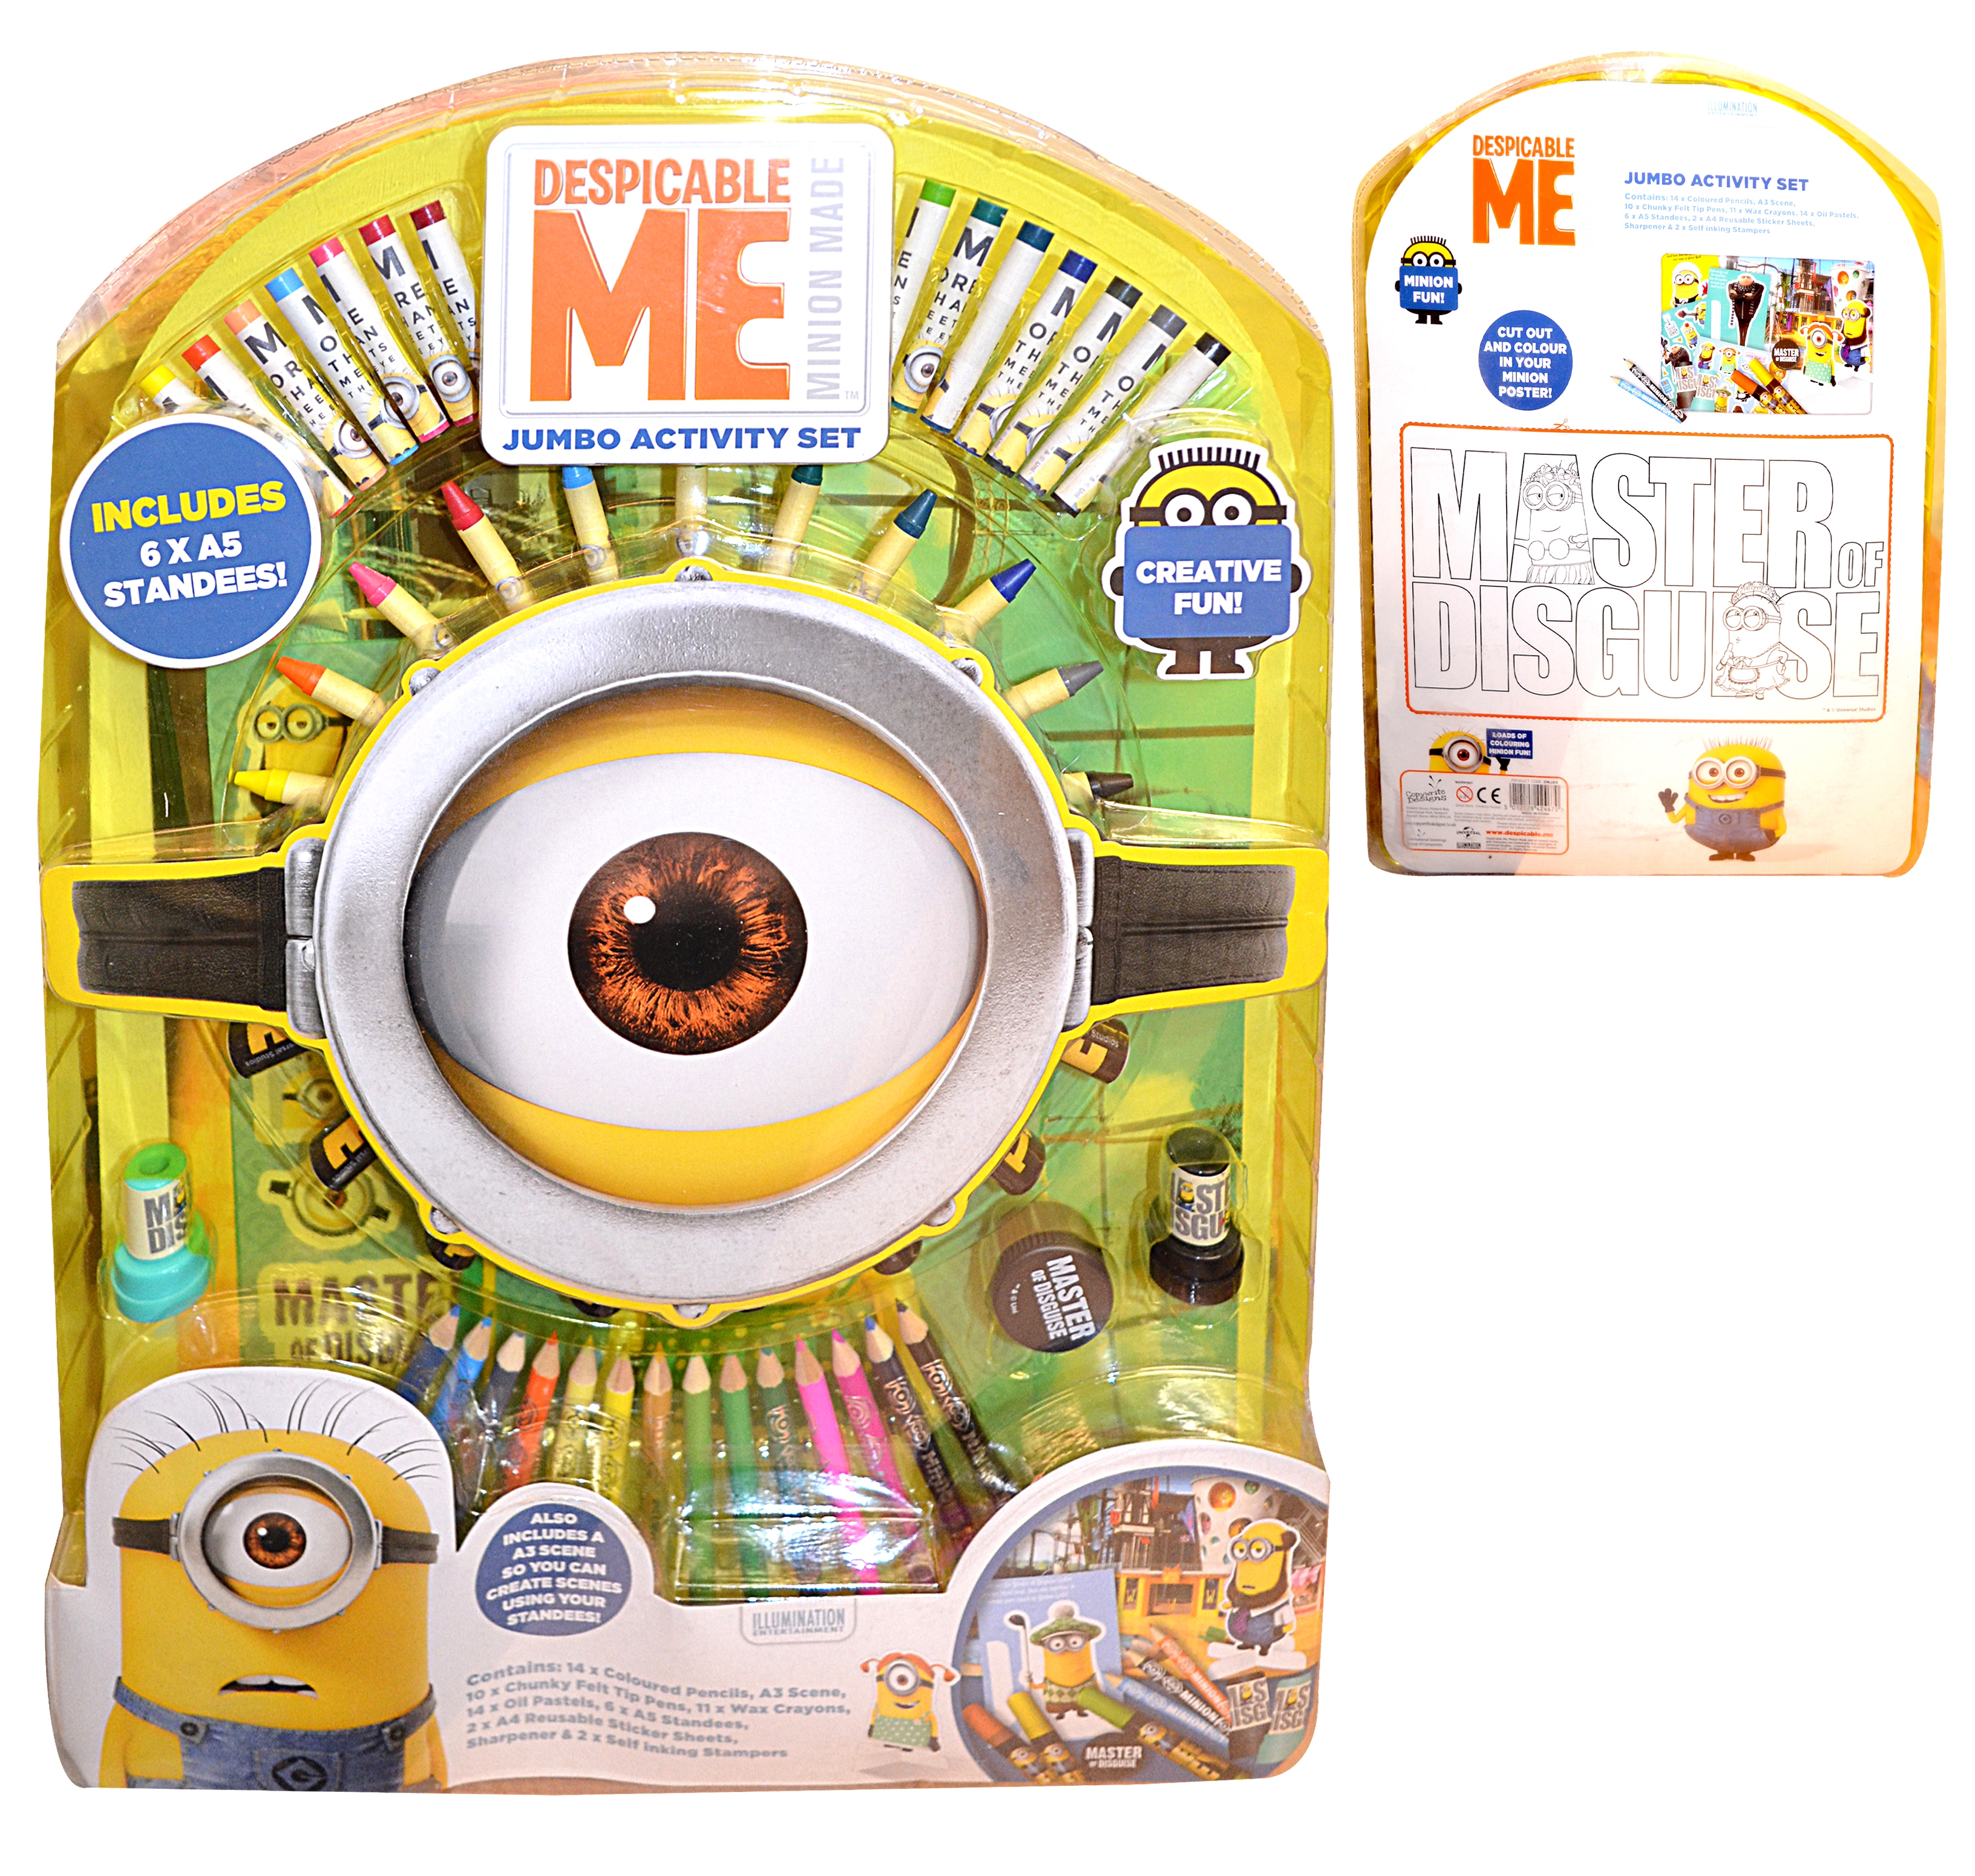 Despicable Me Minions Jumbo Activity Set Stationery